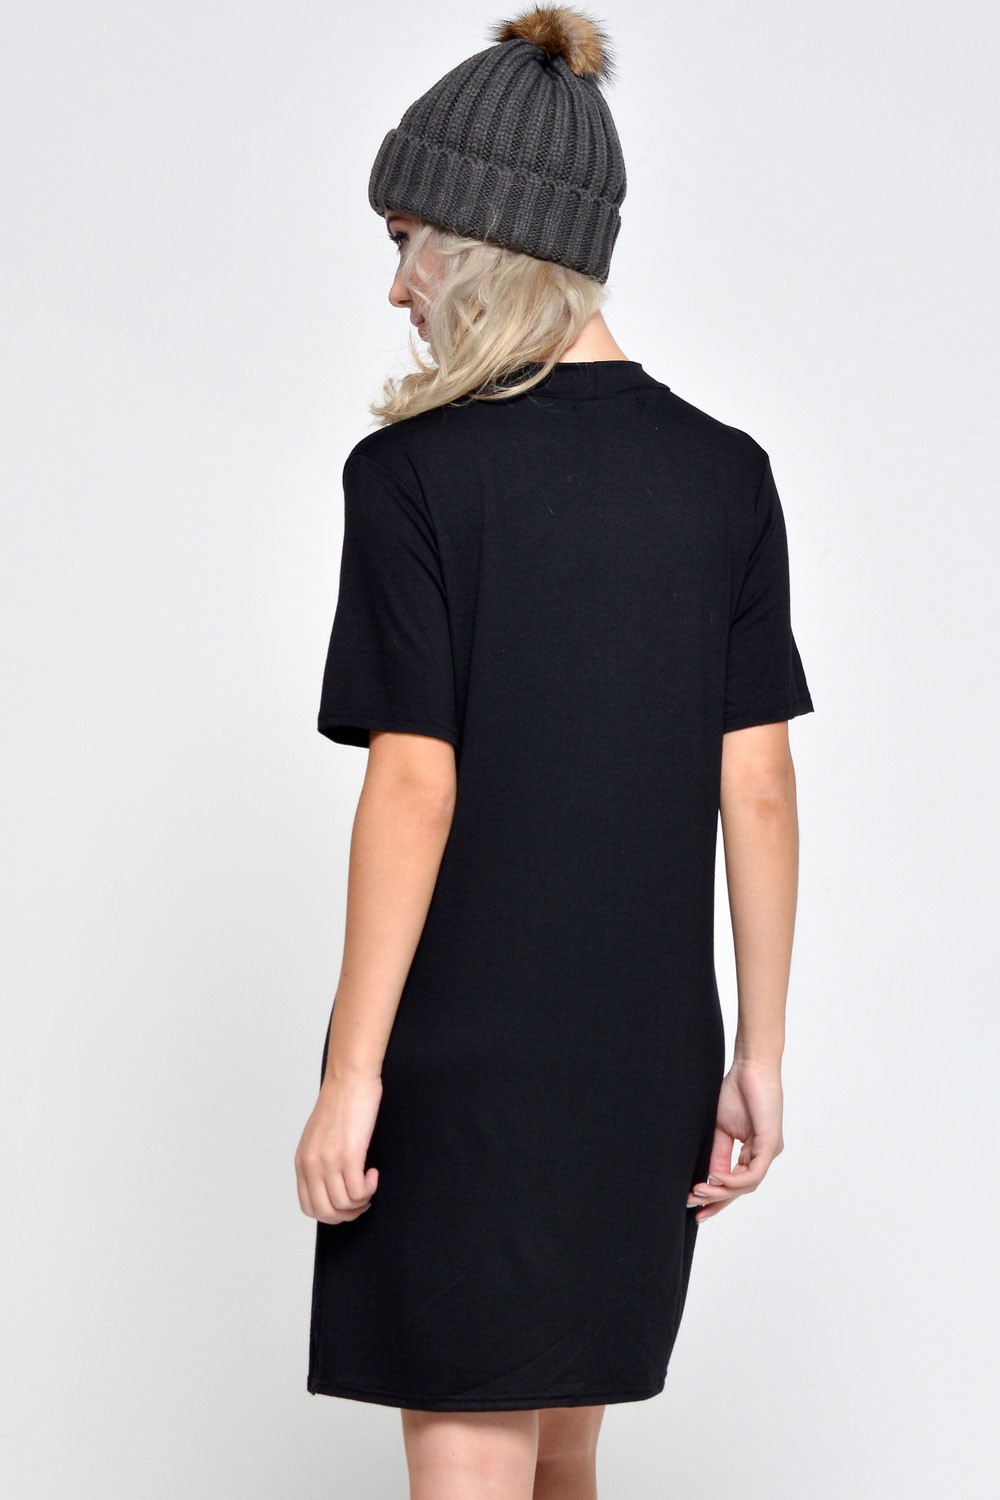 Signature Zara  Cut Out Neck T Shirt  Dress  in Black iCLOTHING